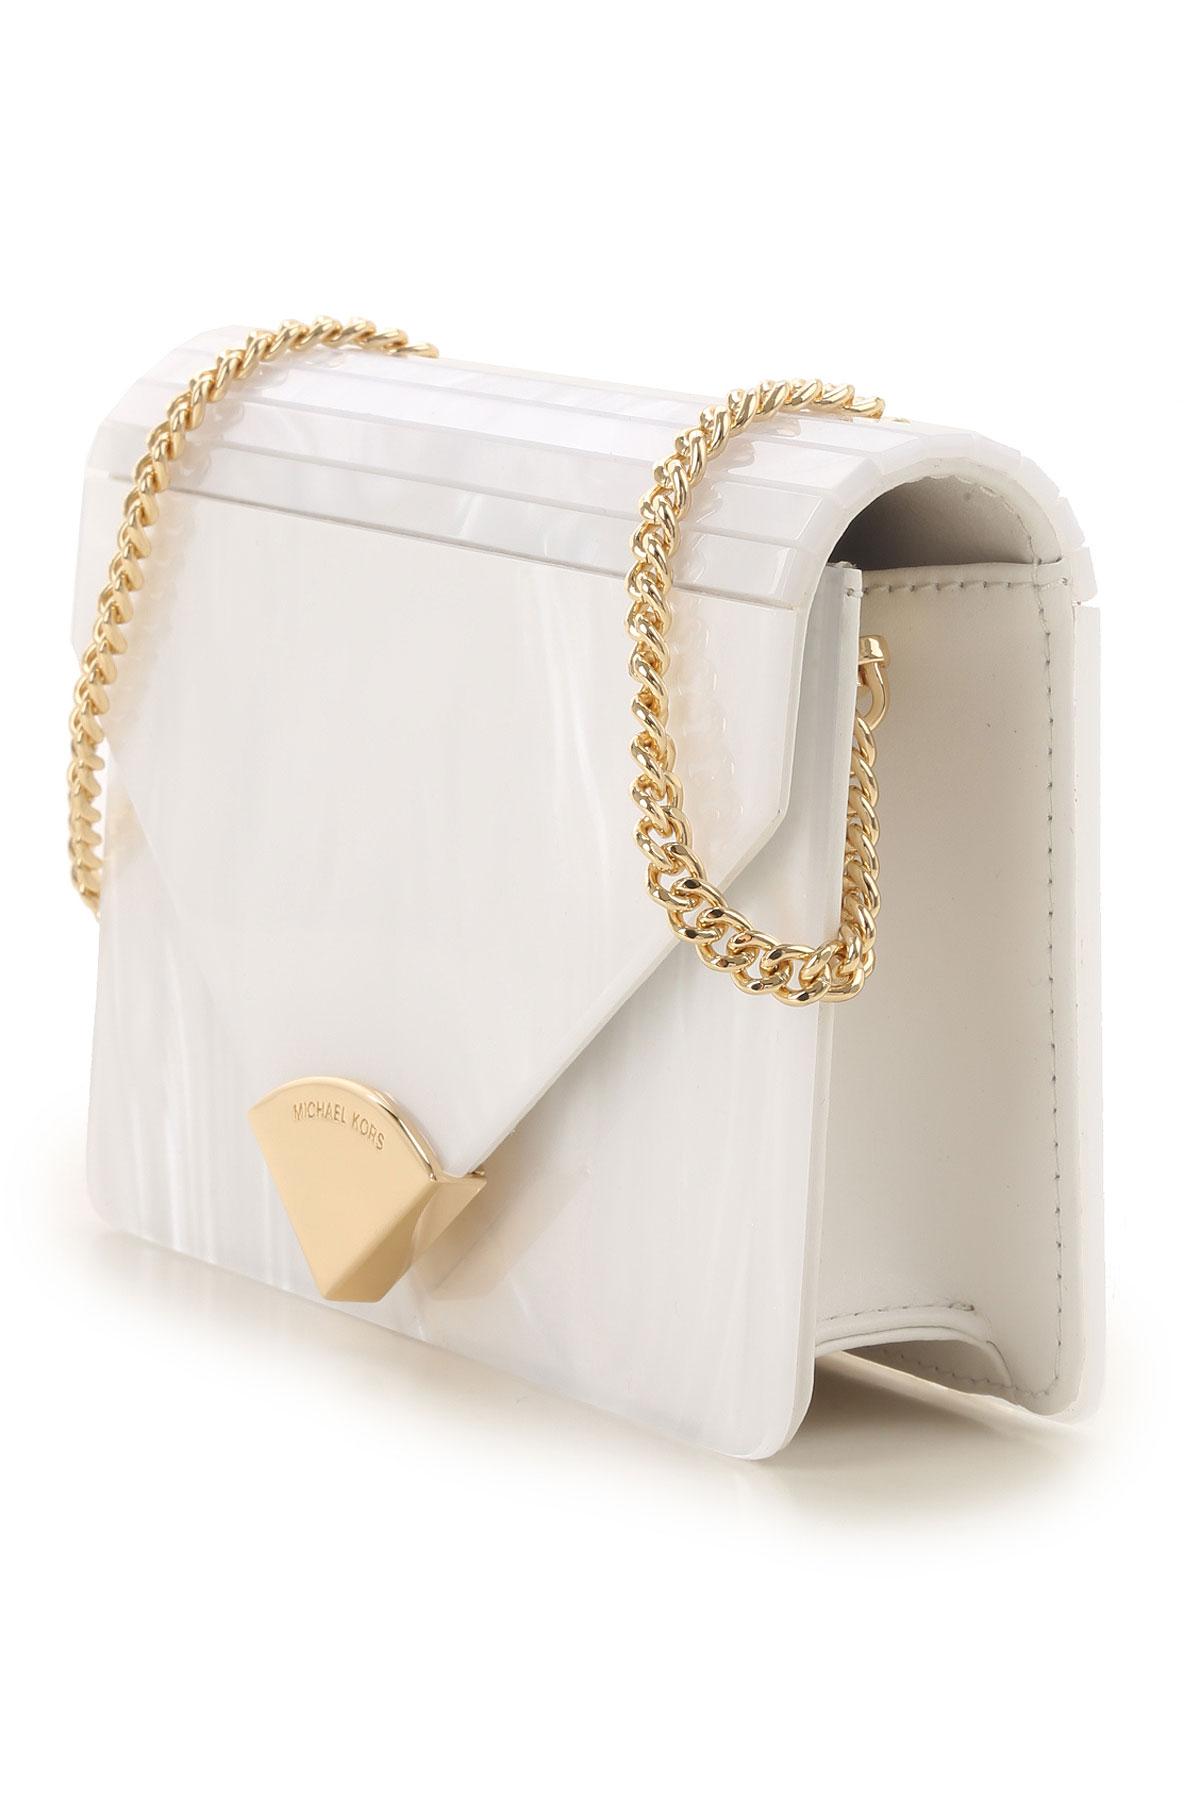 Michael Kors Leather Clutch Bag On Sale in White - Lyst